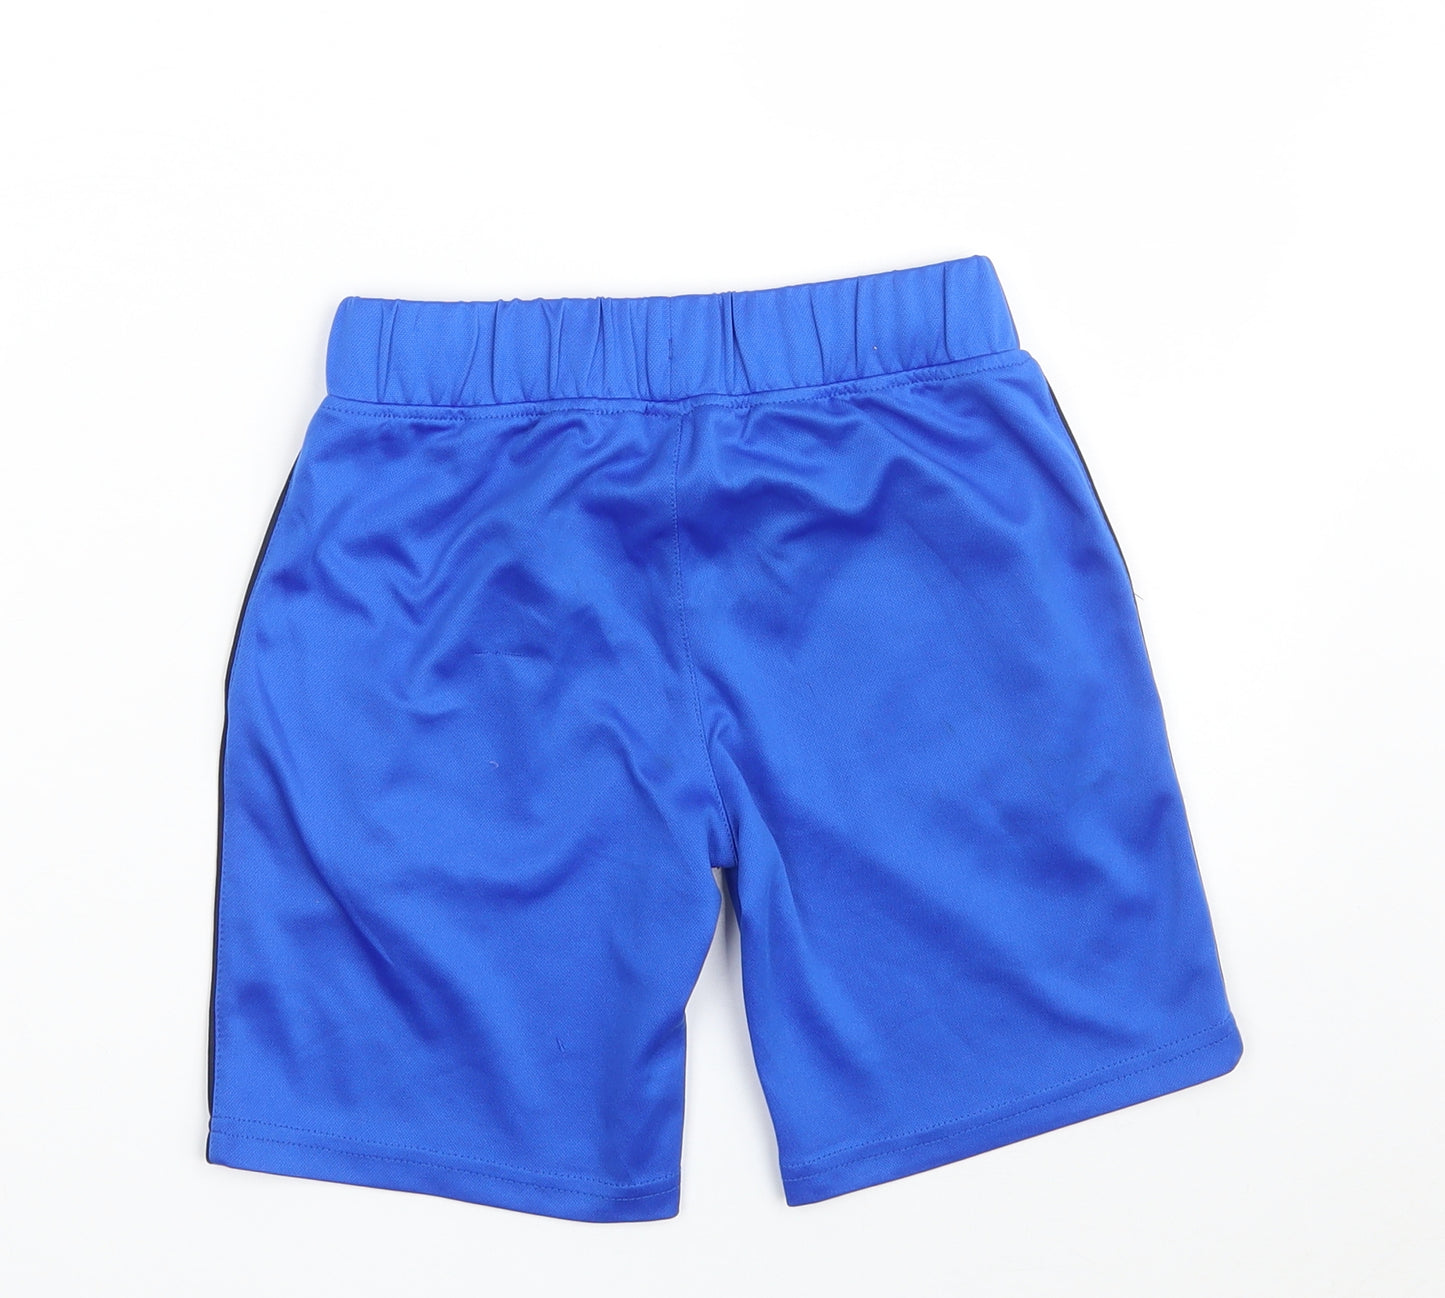 Dunnes Stores Boys Blue  100% Polyester Sweat Shorts Size 8-9 Years  Regular